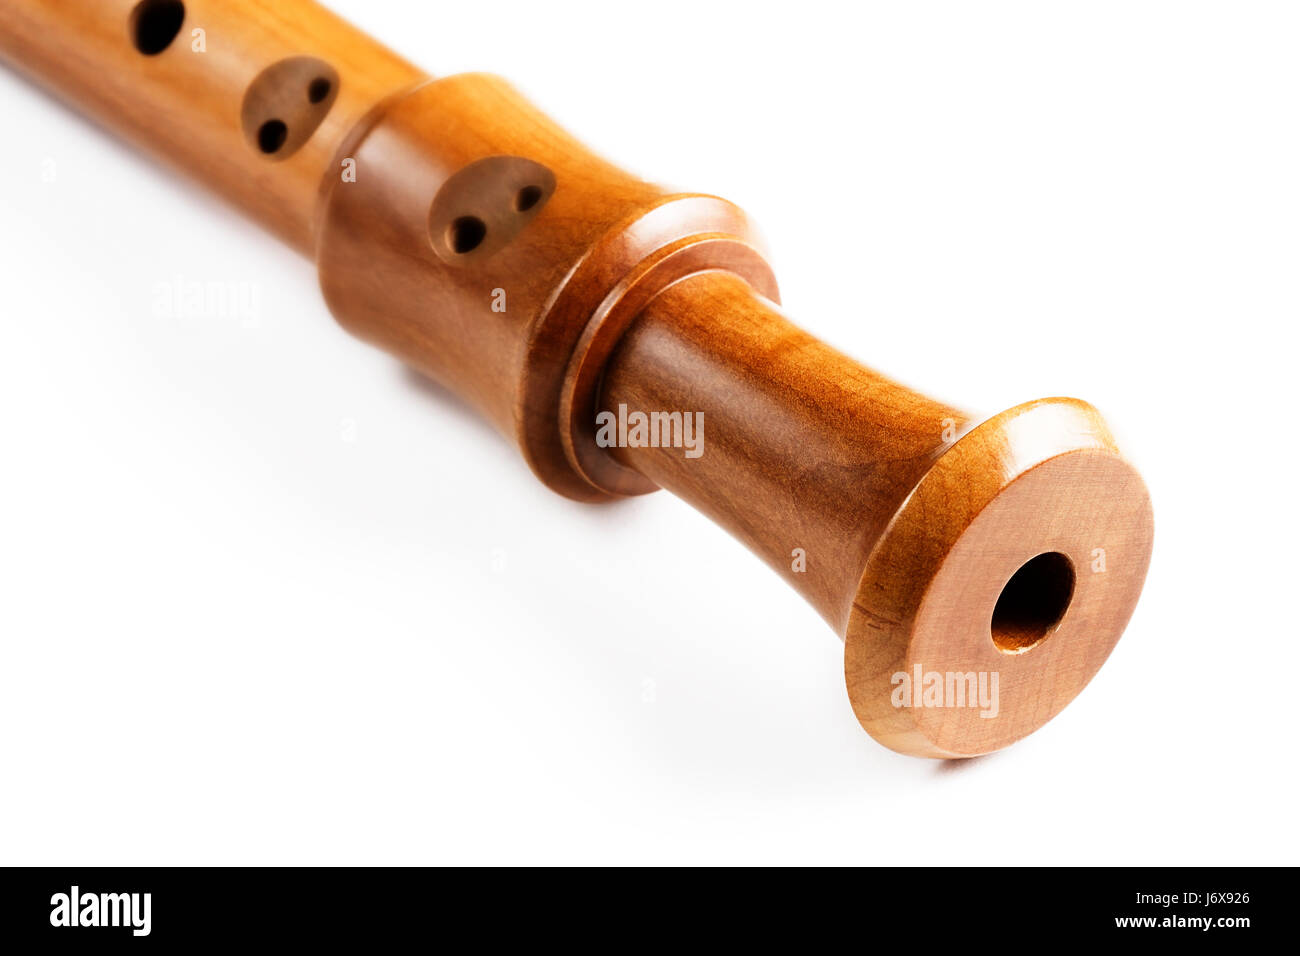 Alto Flute Alto Flute High Resolution Stock Photography and Images - Alamy